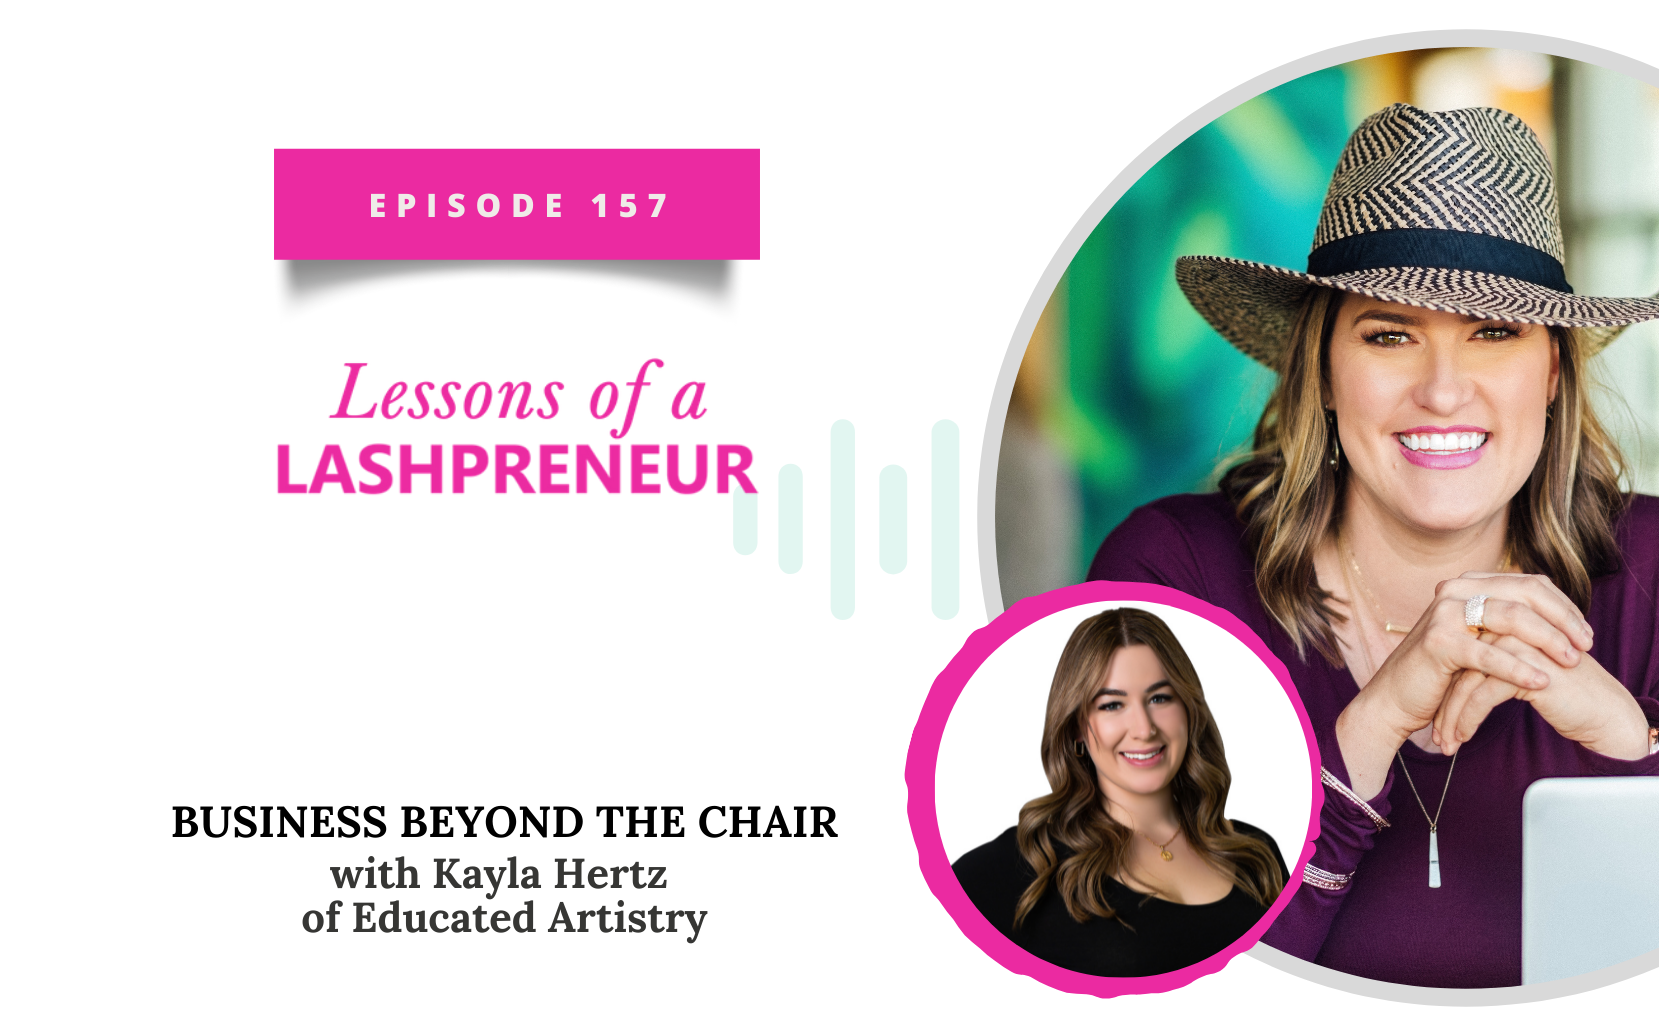 Business Beyond the Chair with Kayla Hertz of Educated Artistry